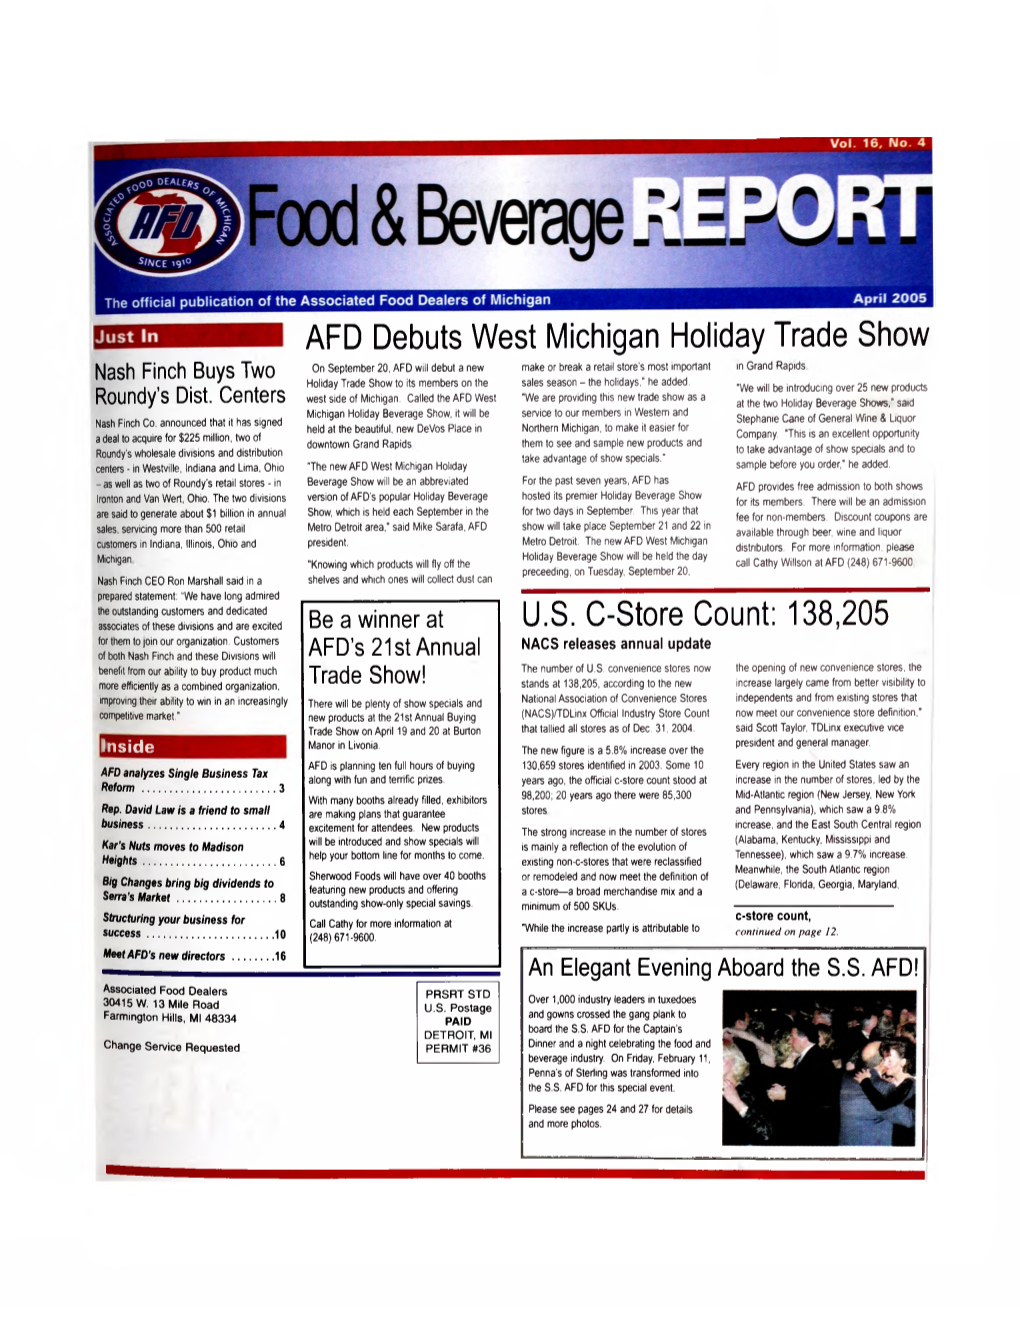 AFD Debuts West Michigan Holiday Trade Show U.S. C-Store Count